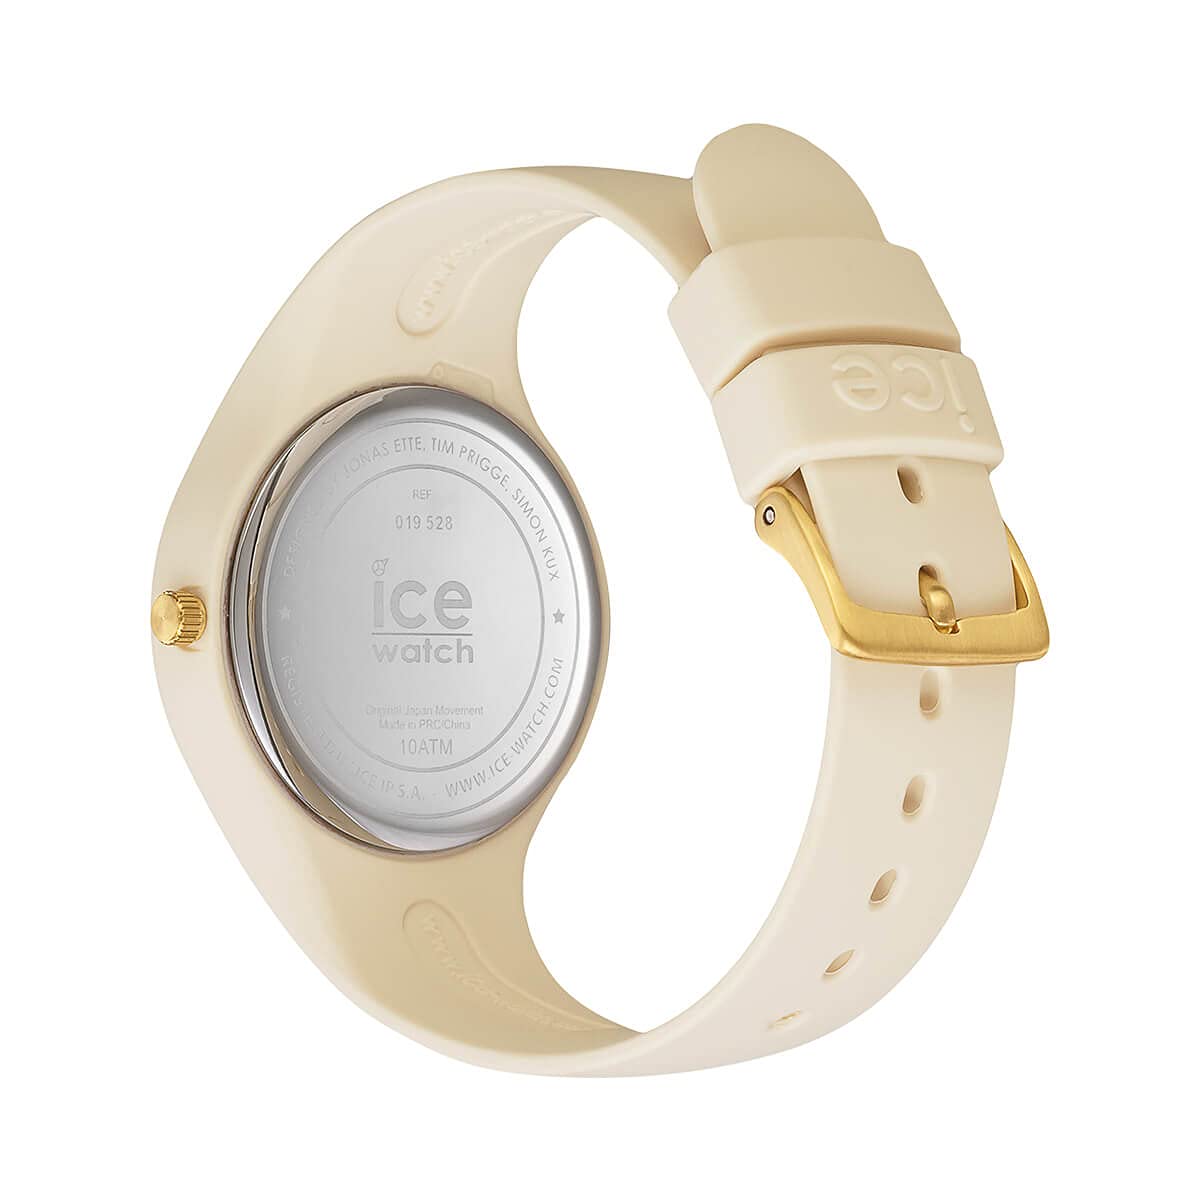 Ice-Watch - ICE glam brushed Almond skin - Women's wristwatch with silicon strap